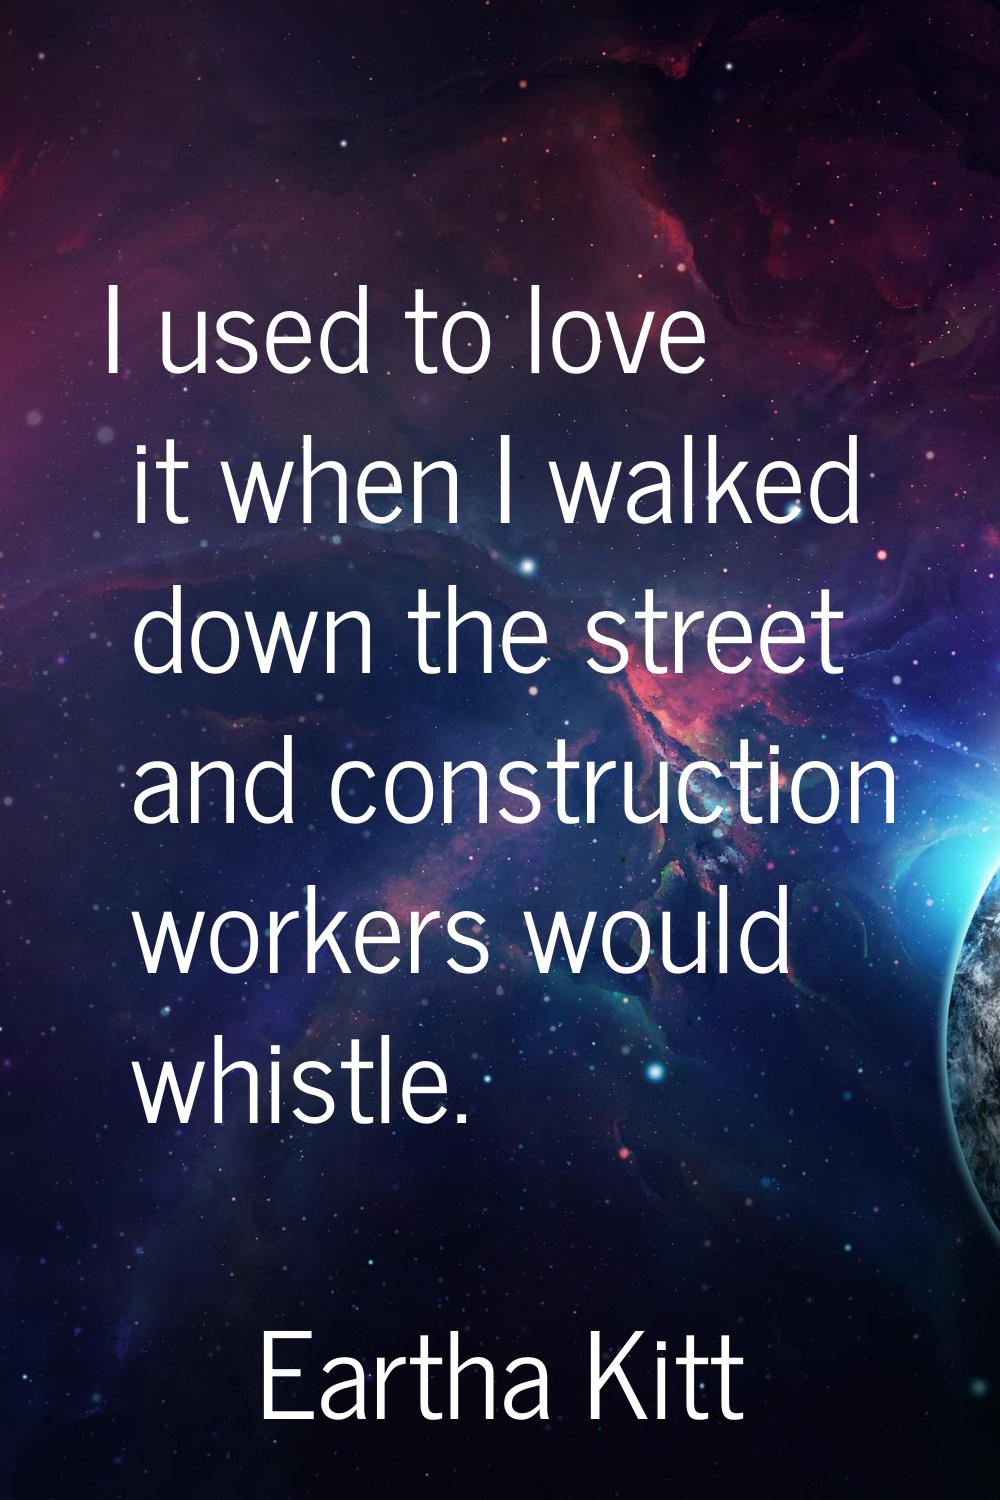 I used to love it when I walked down the street and construction workers would whistle.